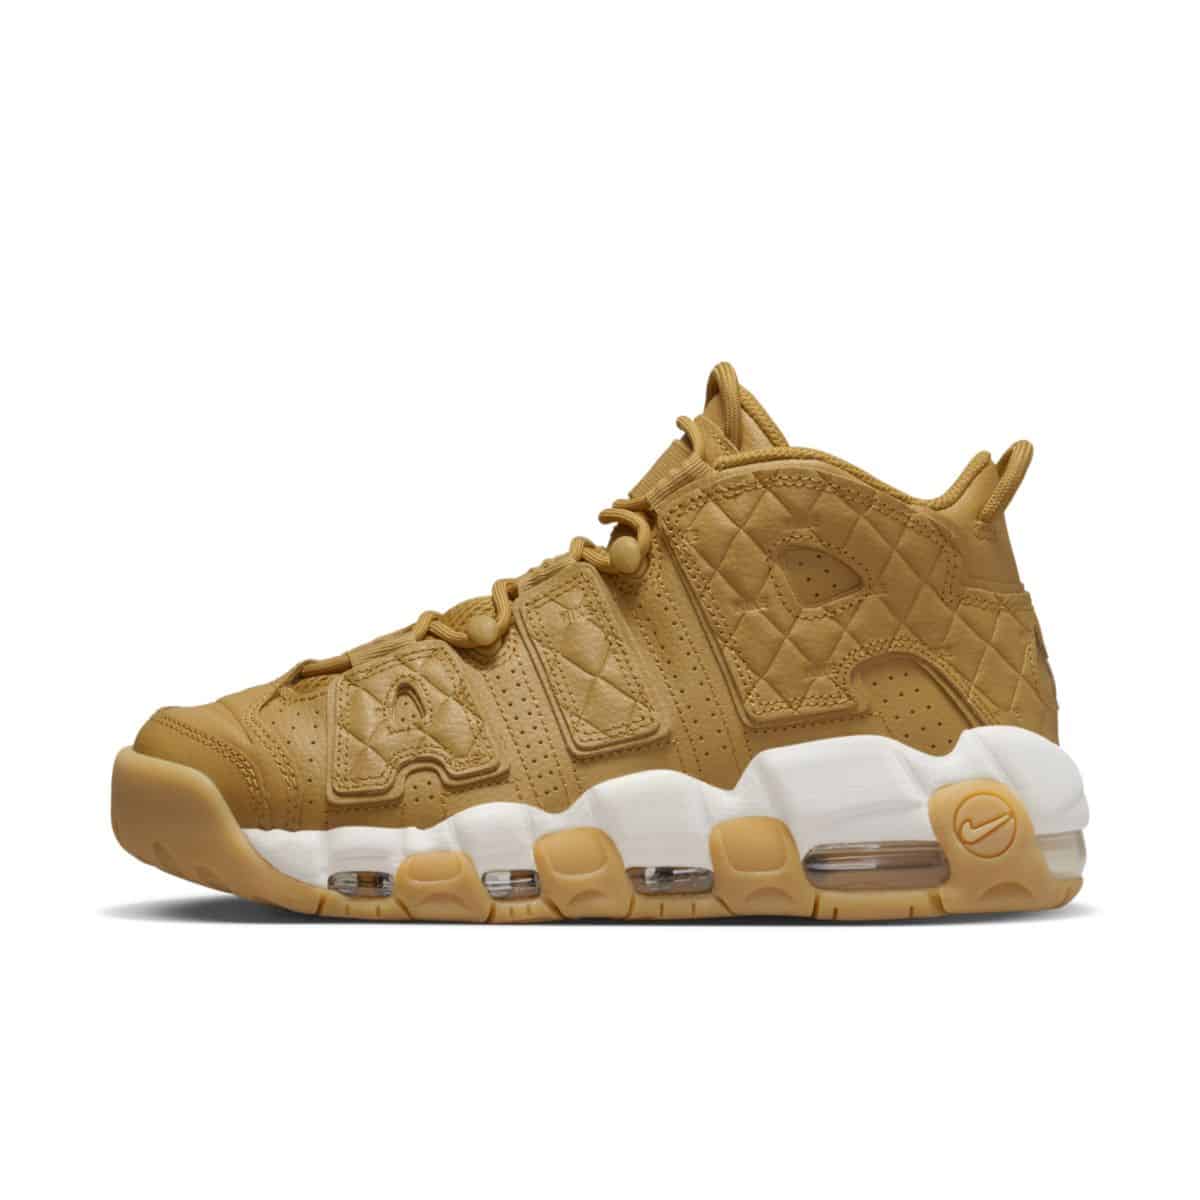 Nike Air More Uptempo Quilted Wheat DX3375-700 2